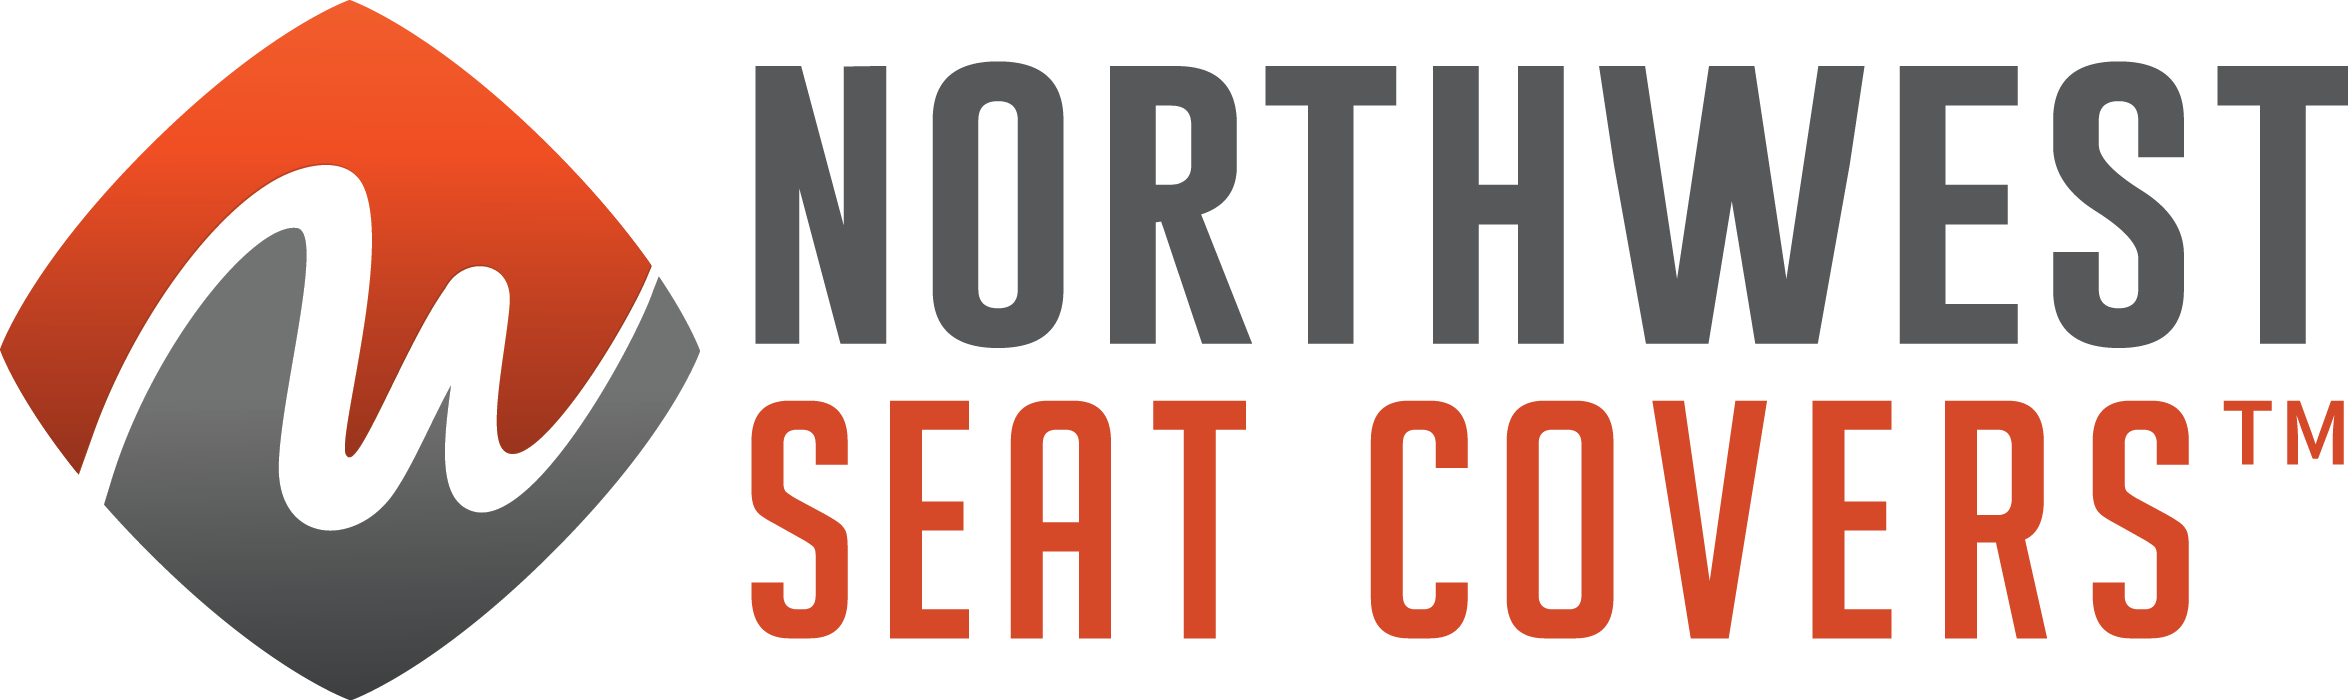 NW Seat Covers